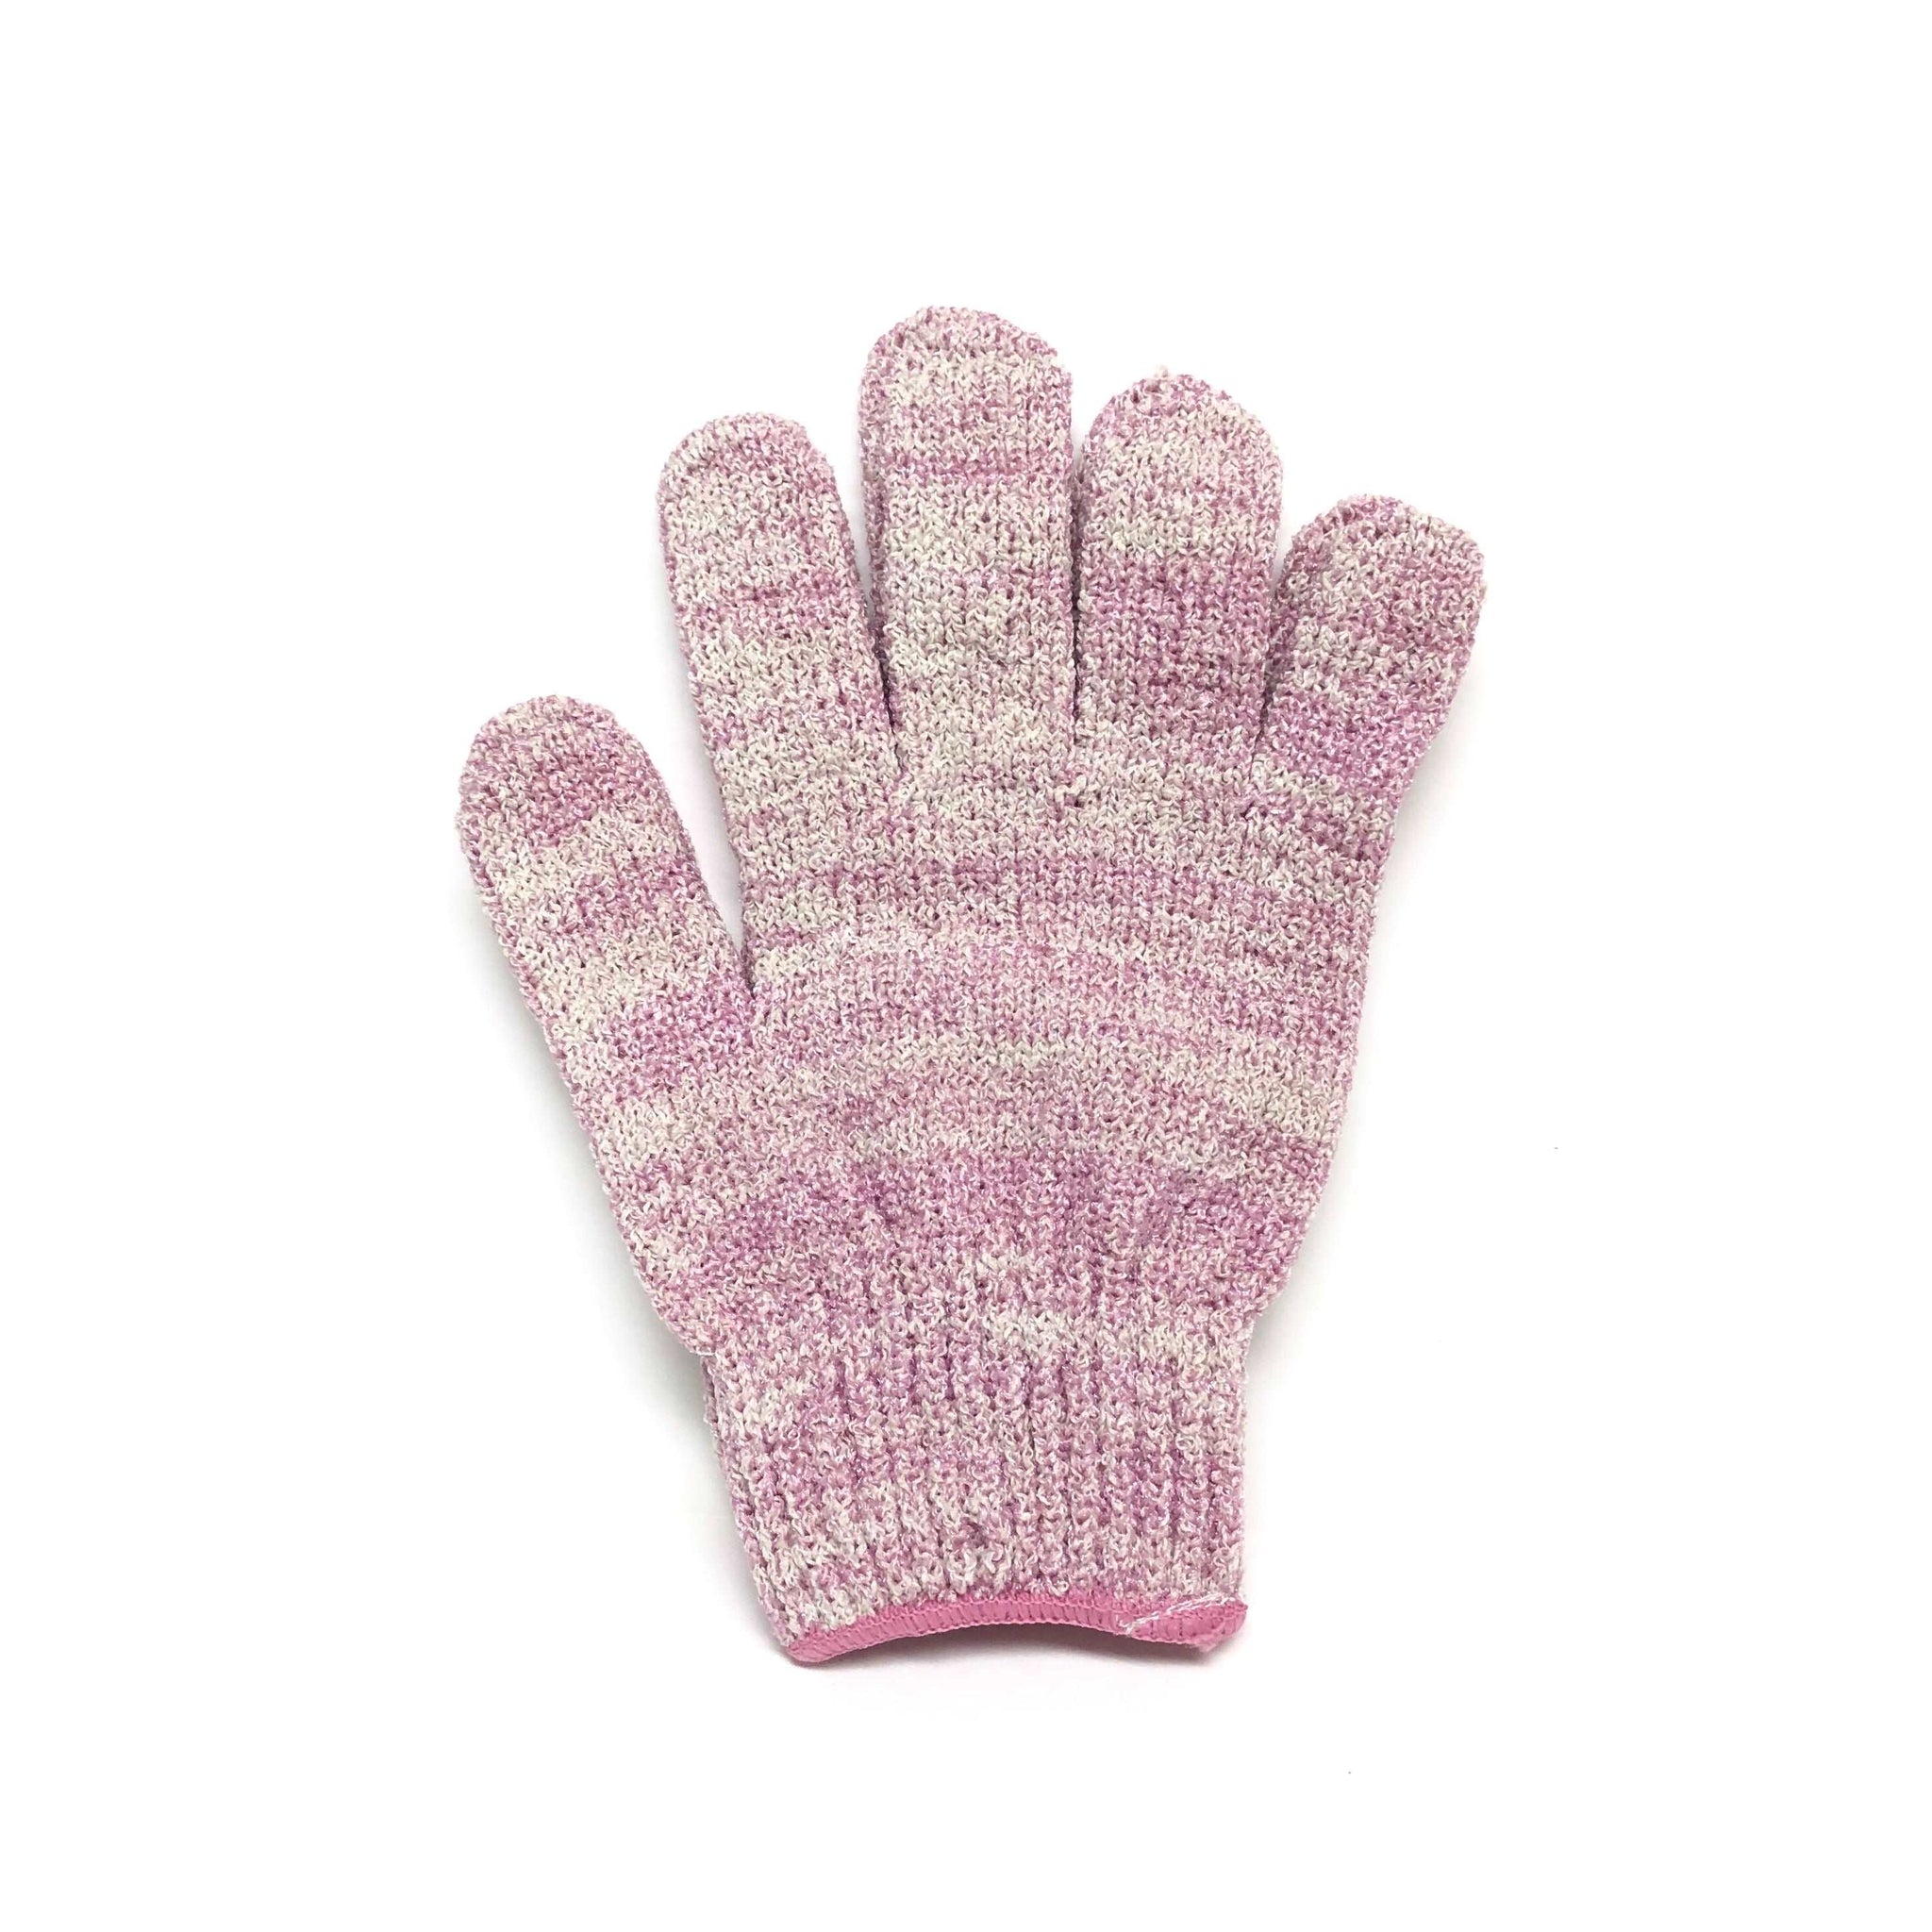 Our high quality shower gloves have a gentle, soft texture for exfoliating and can be used for both facial and body applications in the bath or shower. Sold in pairs. Pink set.